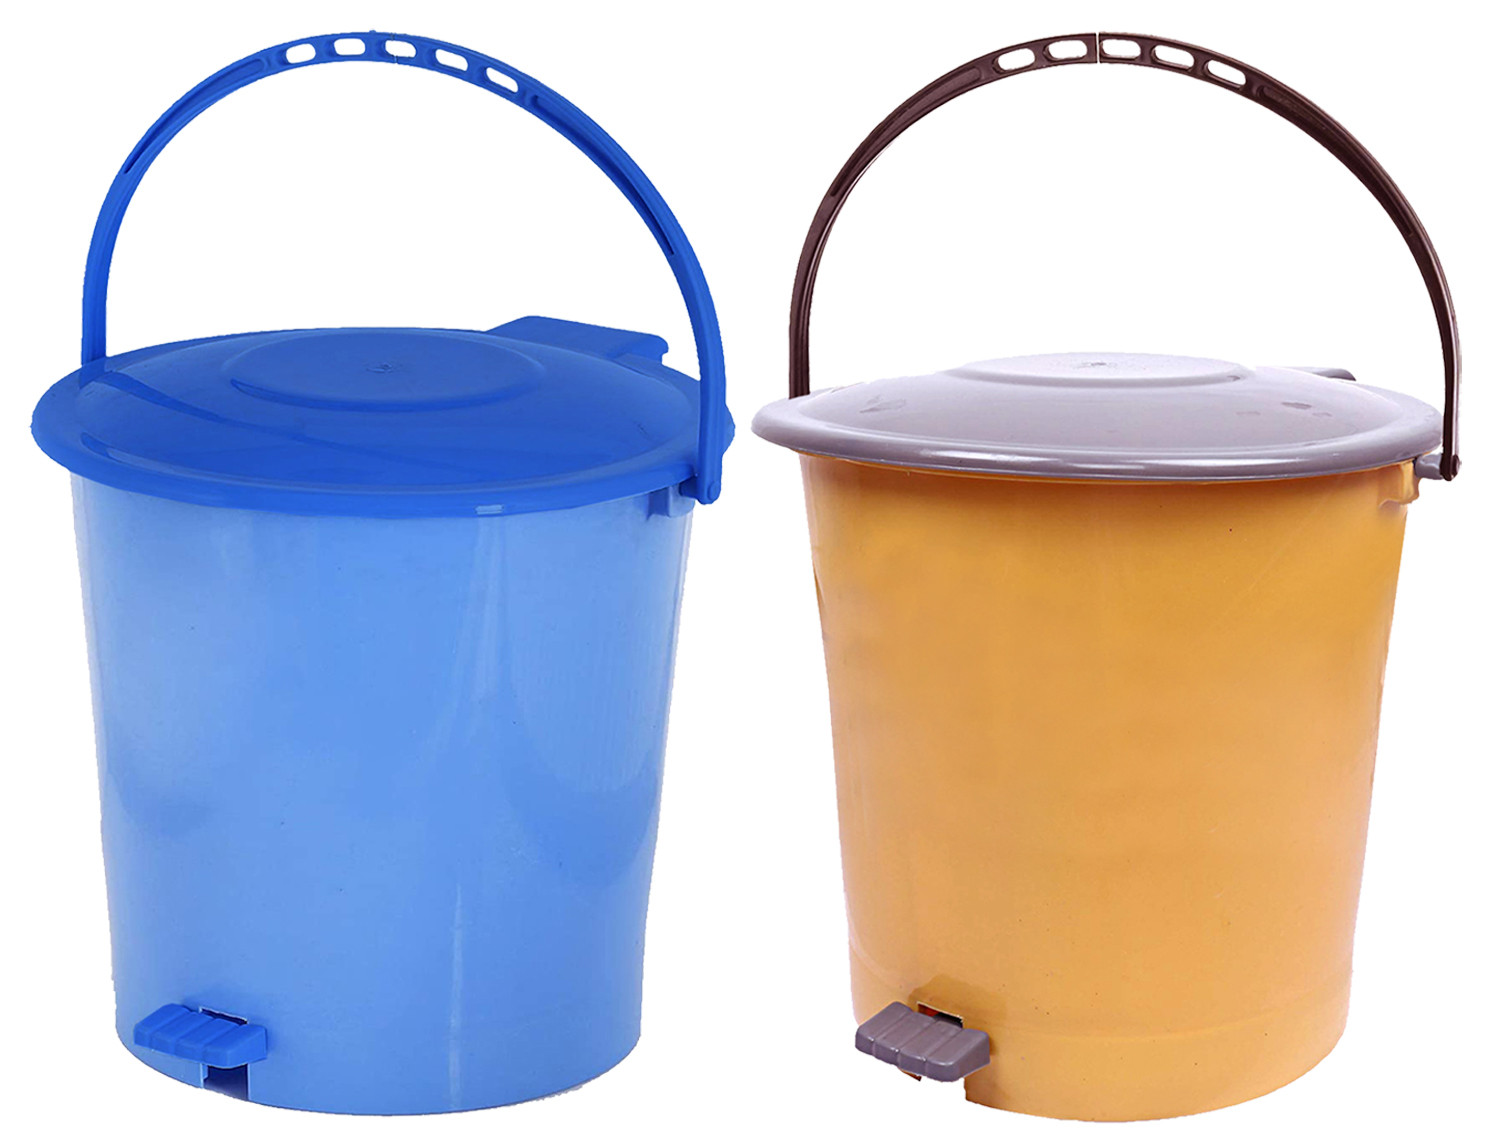 Kuber Industries Ultra Plastic Garbage Waste Pedal Dustbin for Home, Office with Handle, 5 Liters (Blue & Cream)-KUBMART3058